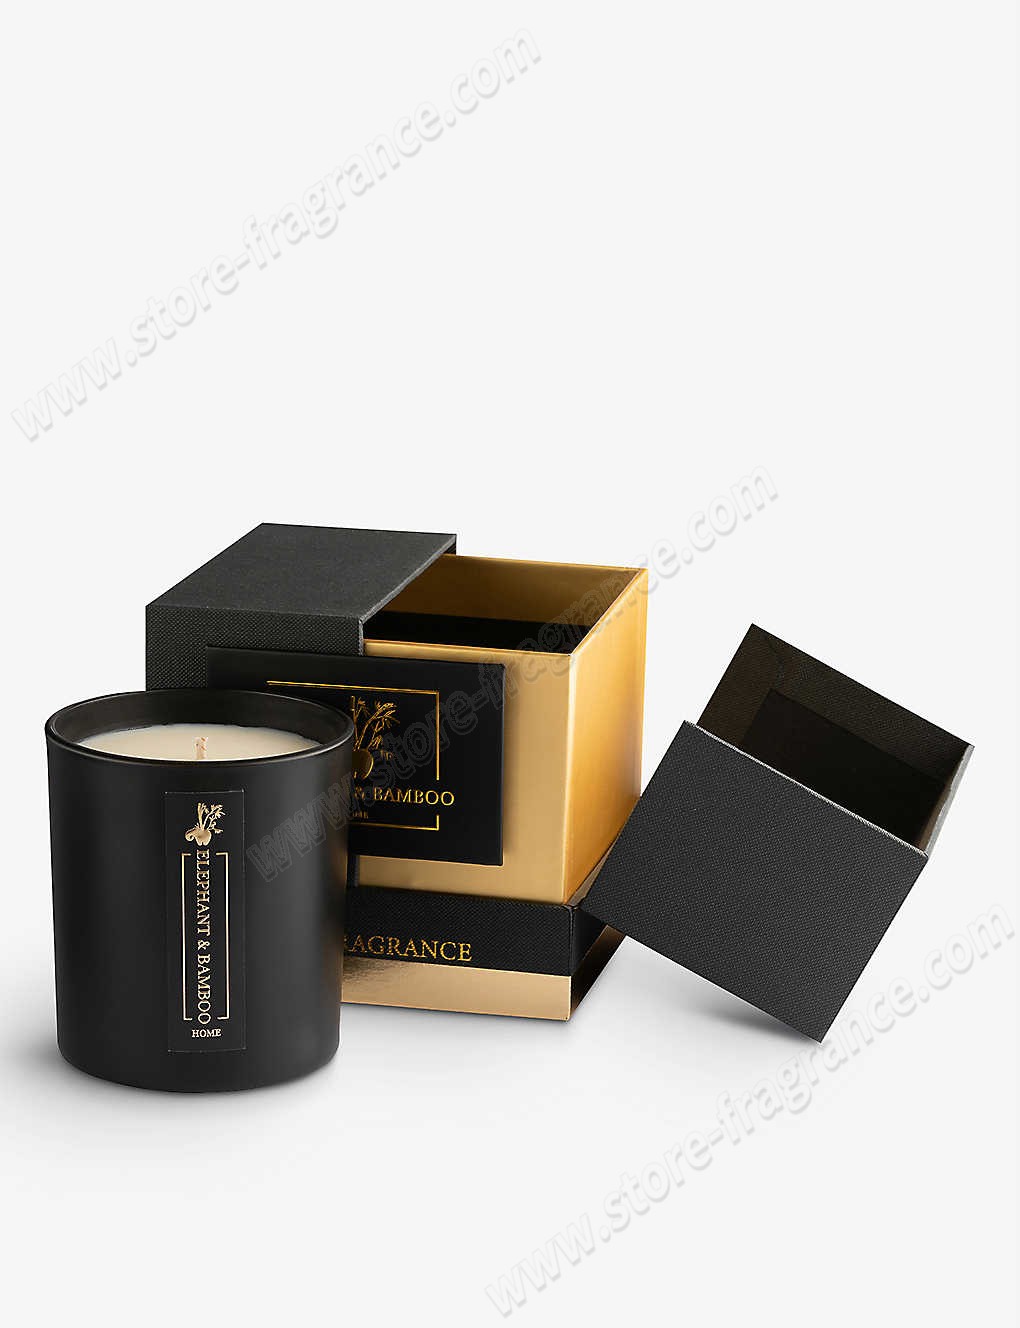 ELEPHANT & BAMBOO/Royal Oud scented candle 300g ✿ Discount Store - -1